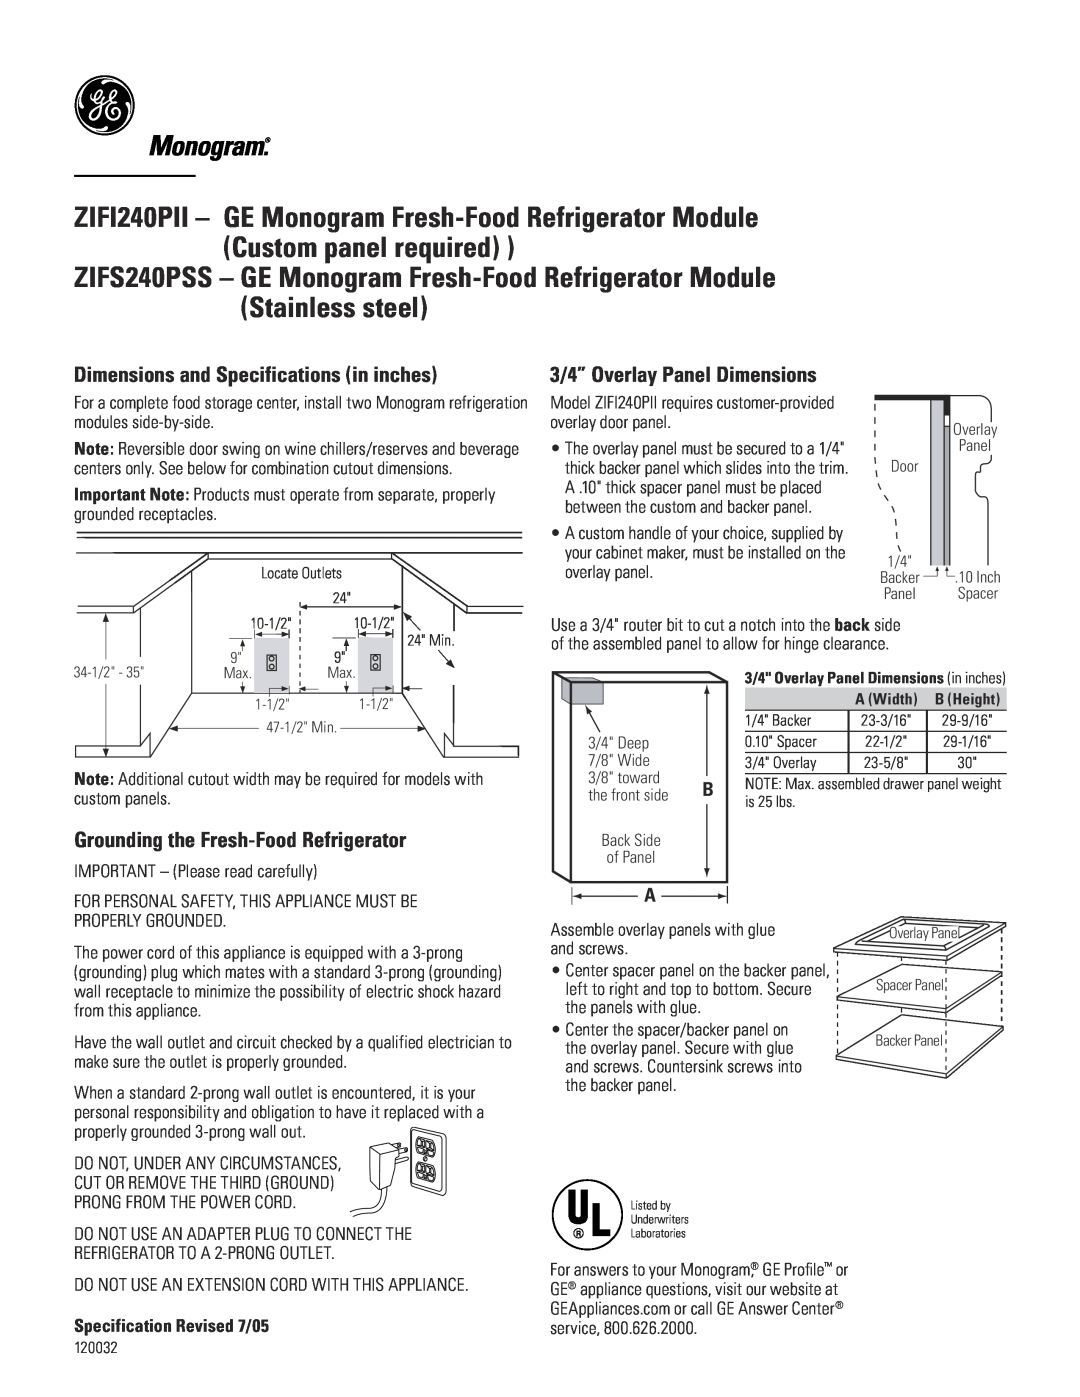 GE ZIFI240PLII, ZIFS240PSS 3/4” Overlay Panel Dimensions, Grounding the Fresh-Food Refrigerator, Custom panel required 